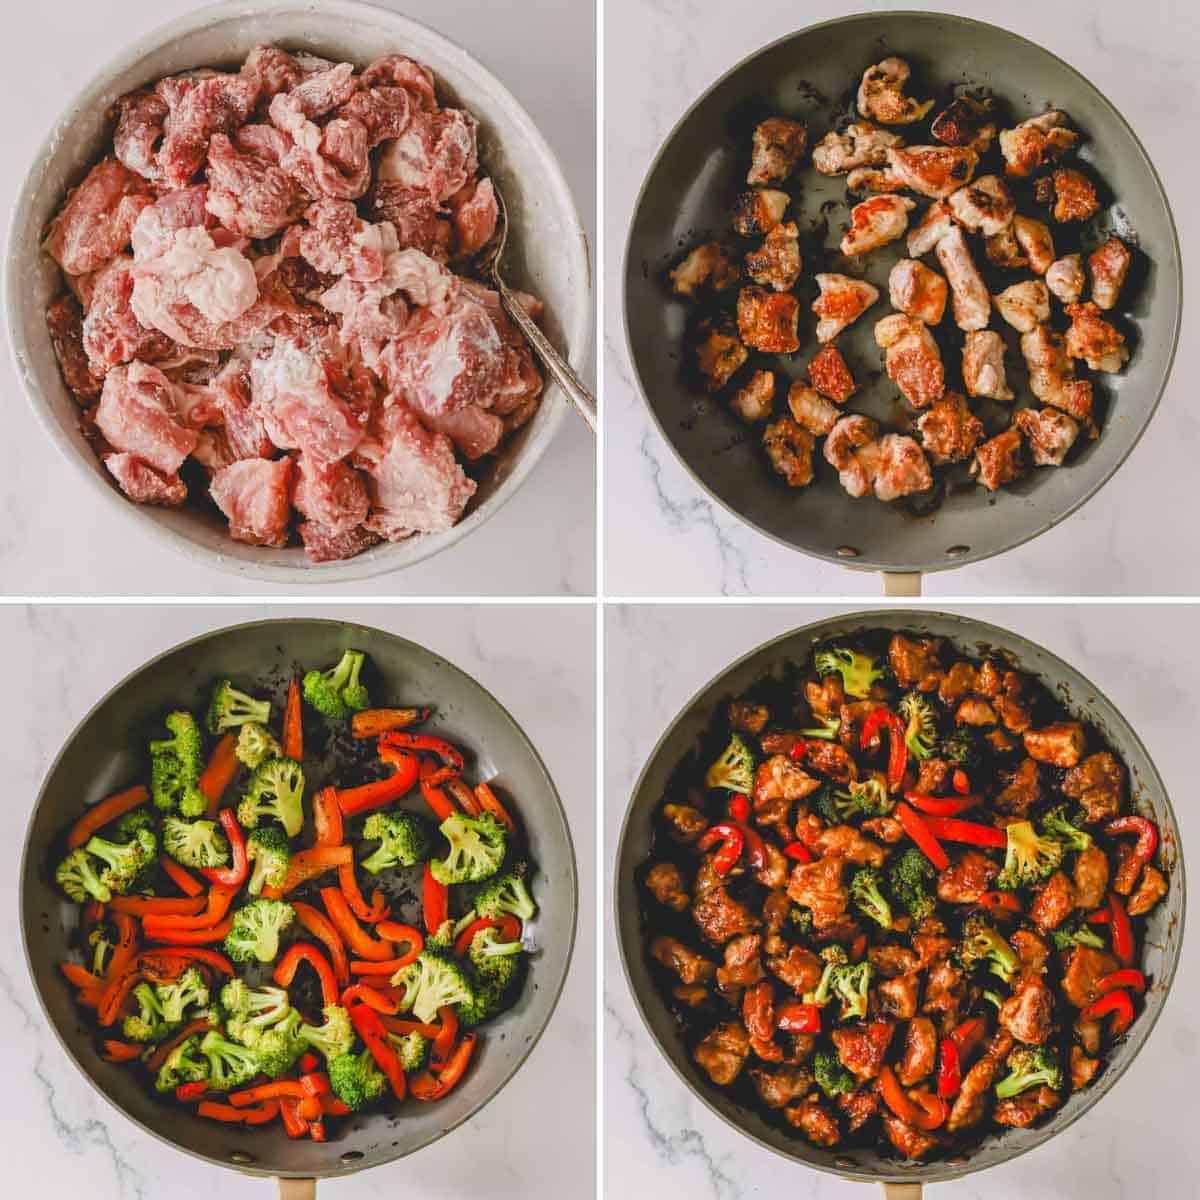 Four images showing the process of searing pork and creating a stir fry.